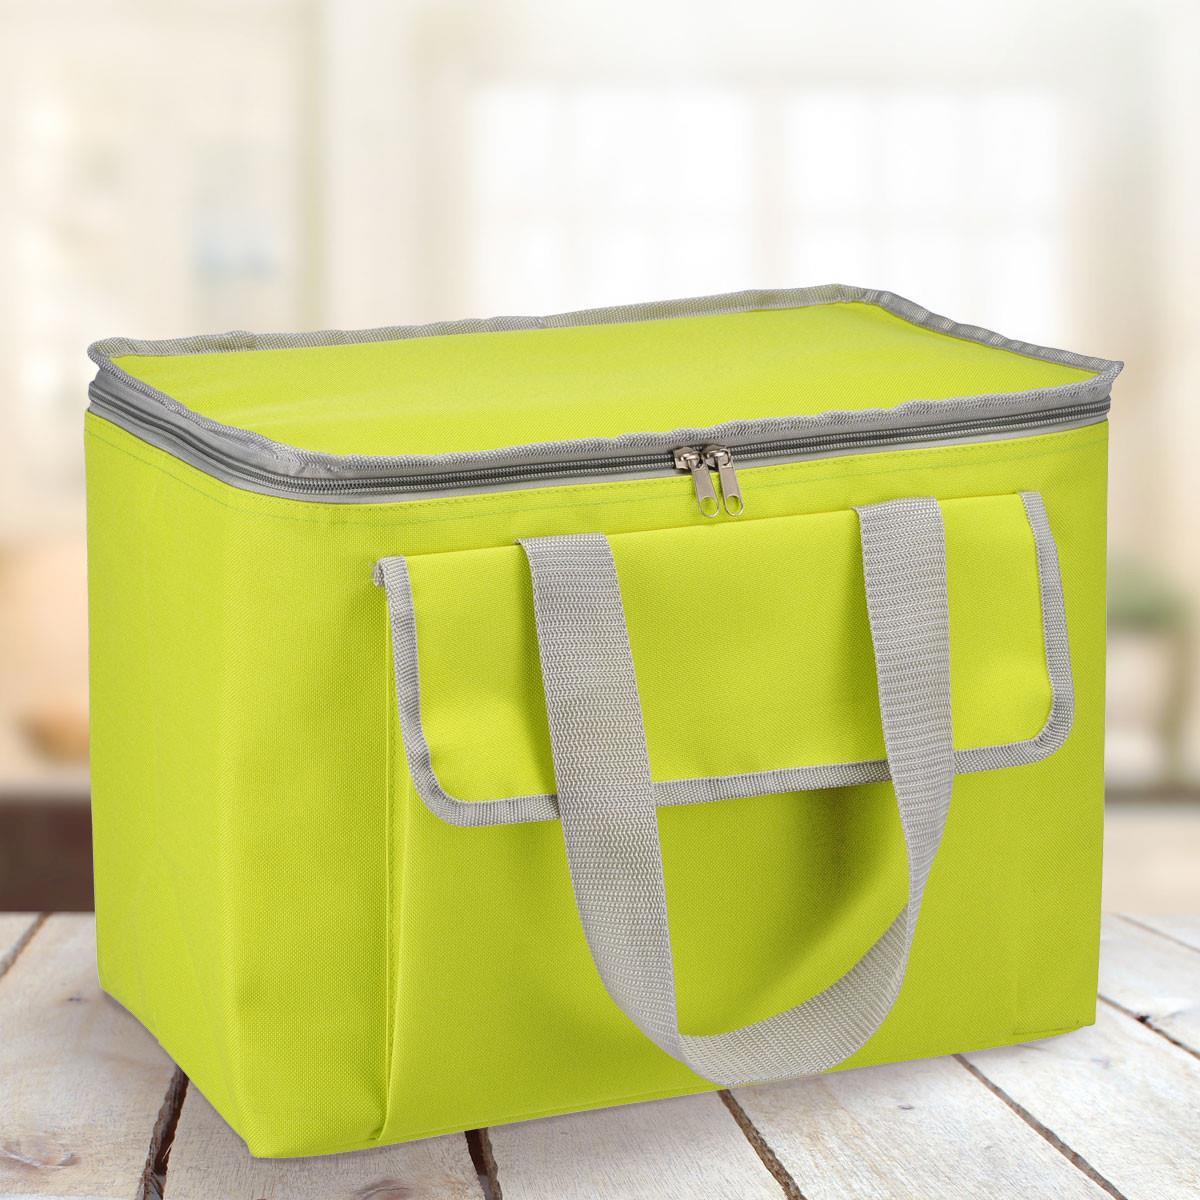 Large 30L Insulated Cool Bag by Geezy - UKBuyZone